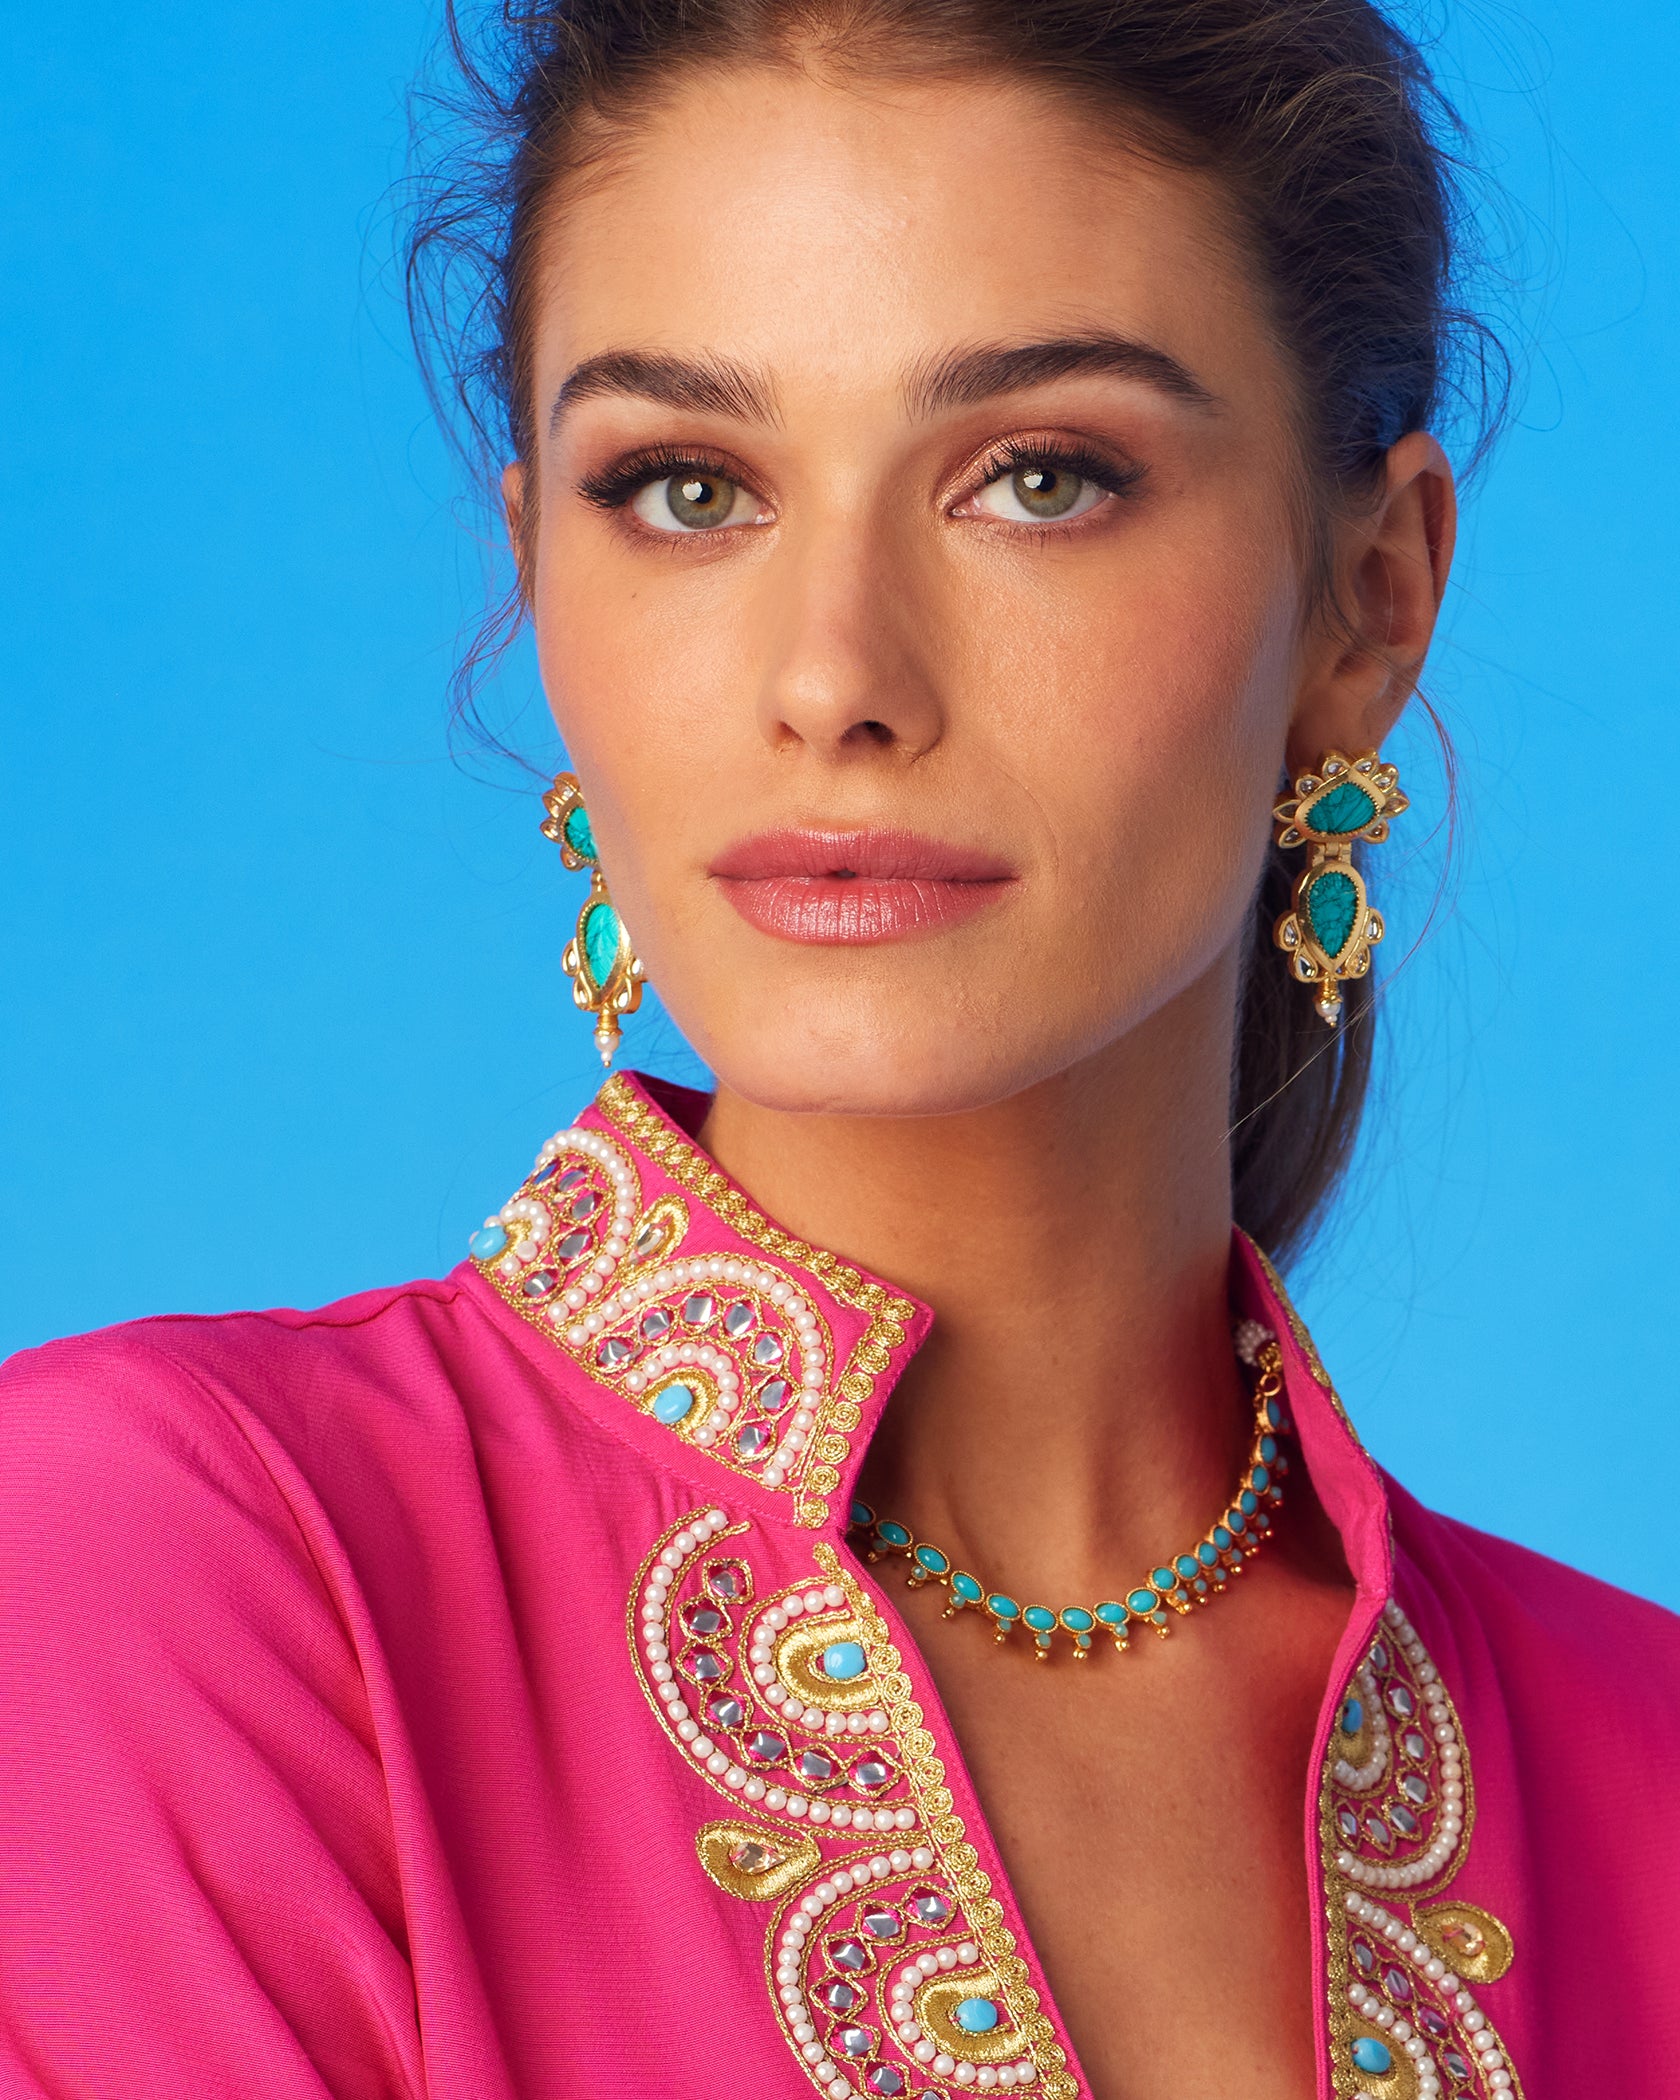 Mini Preston Earrings in Turquoise Colored Stone-Worn with the Noor Pink Tunic Dress